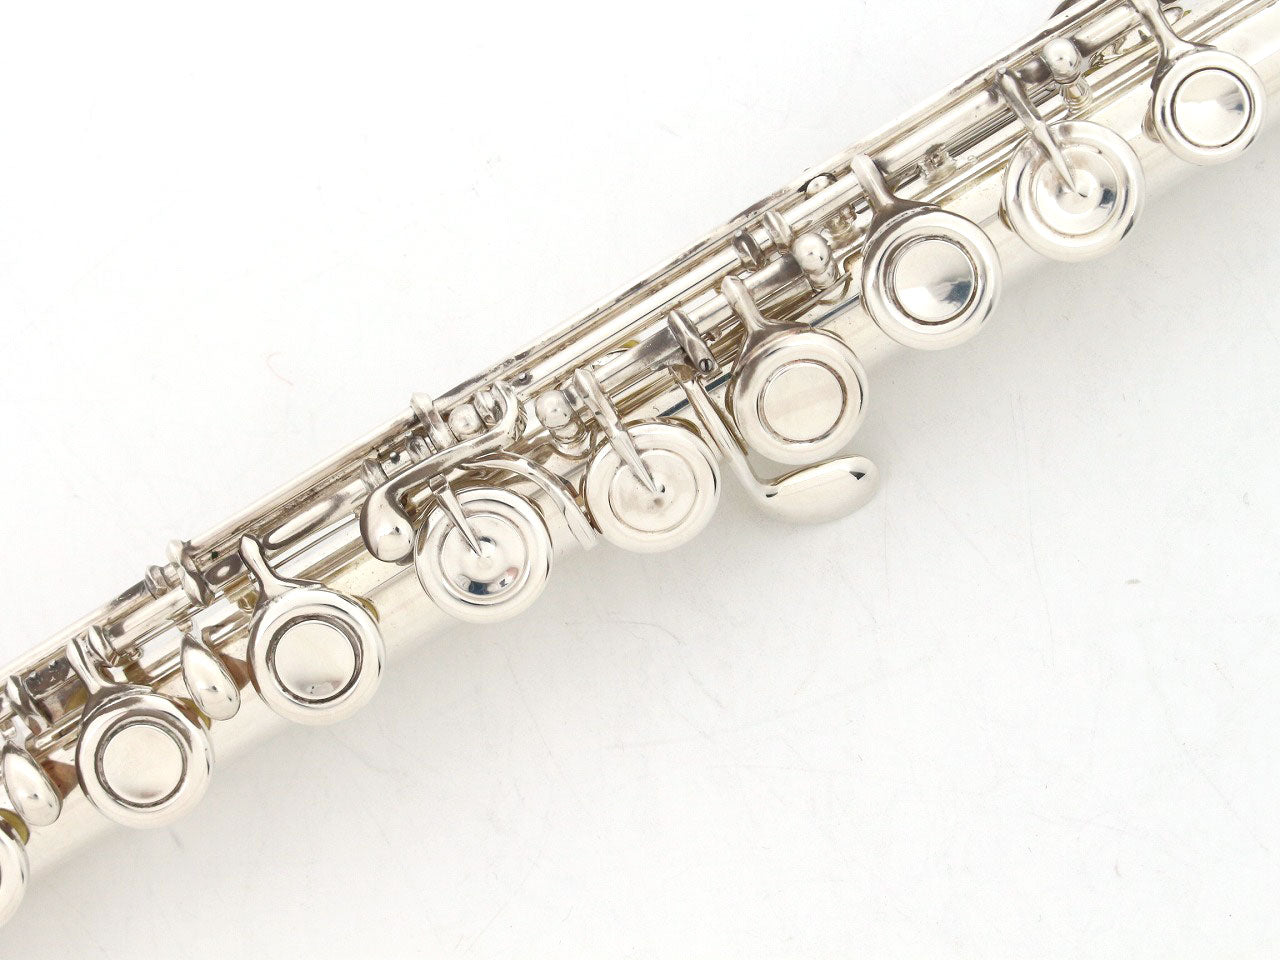 [SN 005848] USED YAMAHA / Flute YFL-614 Silver plated finish, all tampos replaced [09]